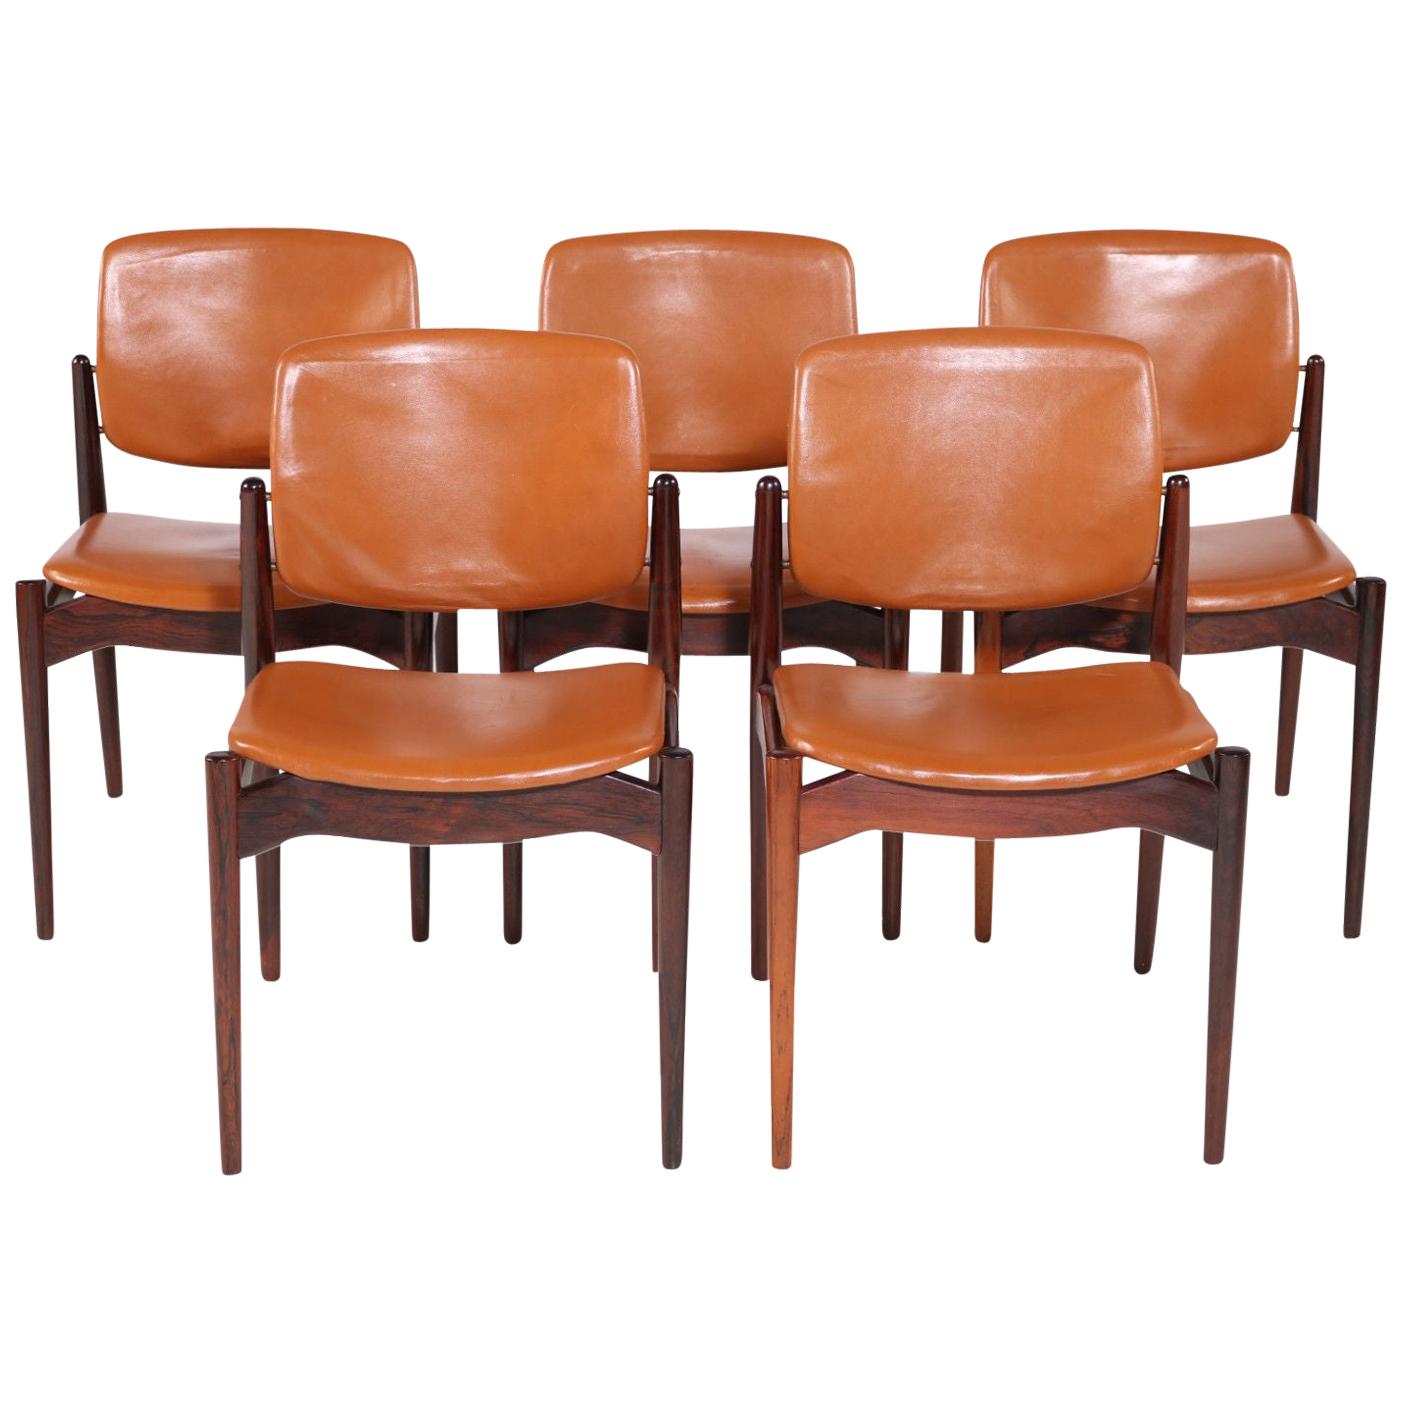 Set of Five Erik Buch Refinished Dining Chairs in Rosewood, Inc. Reupholstery